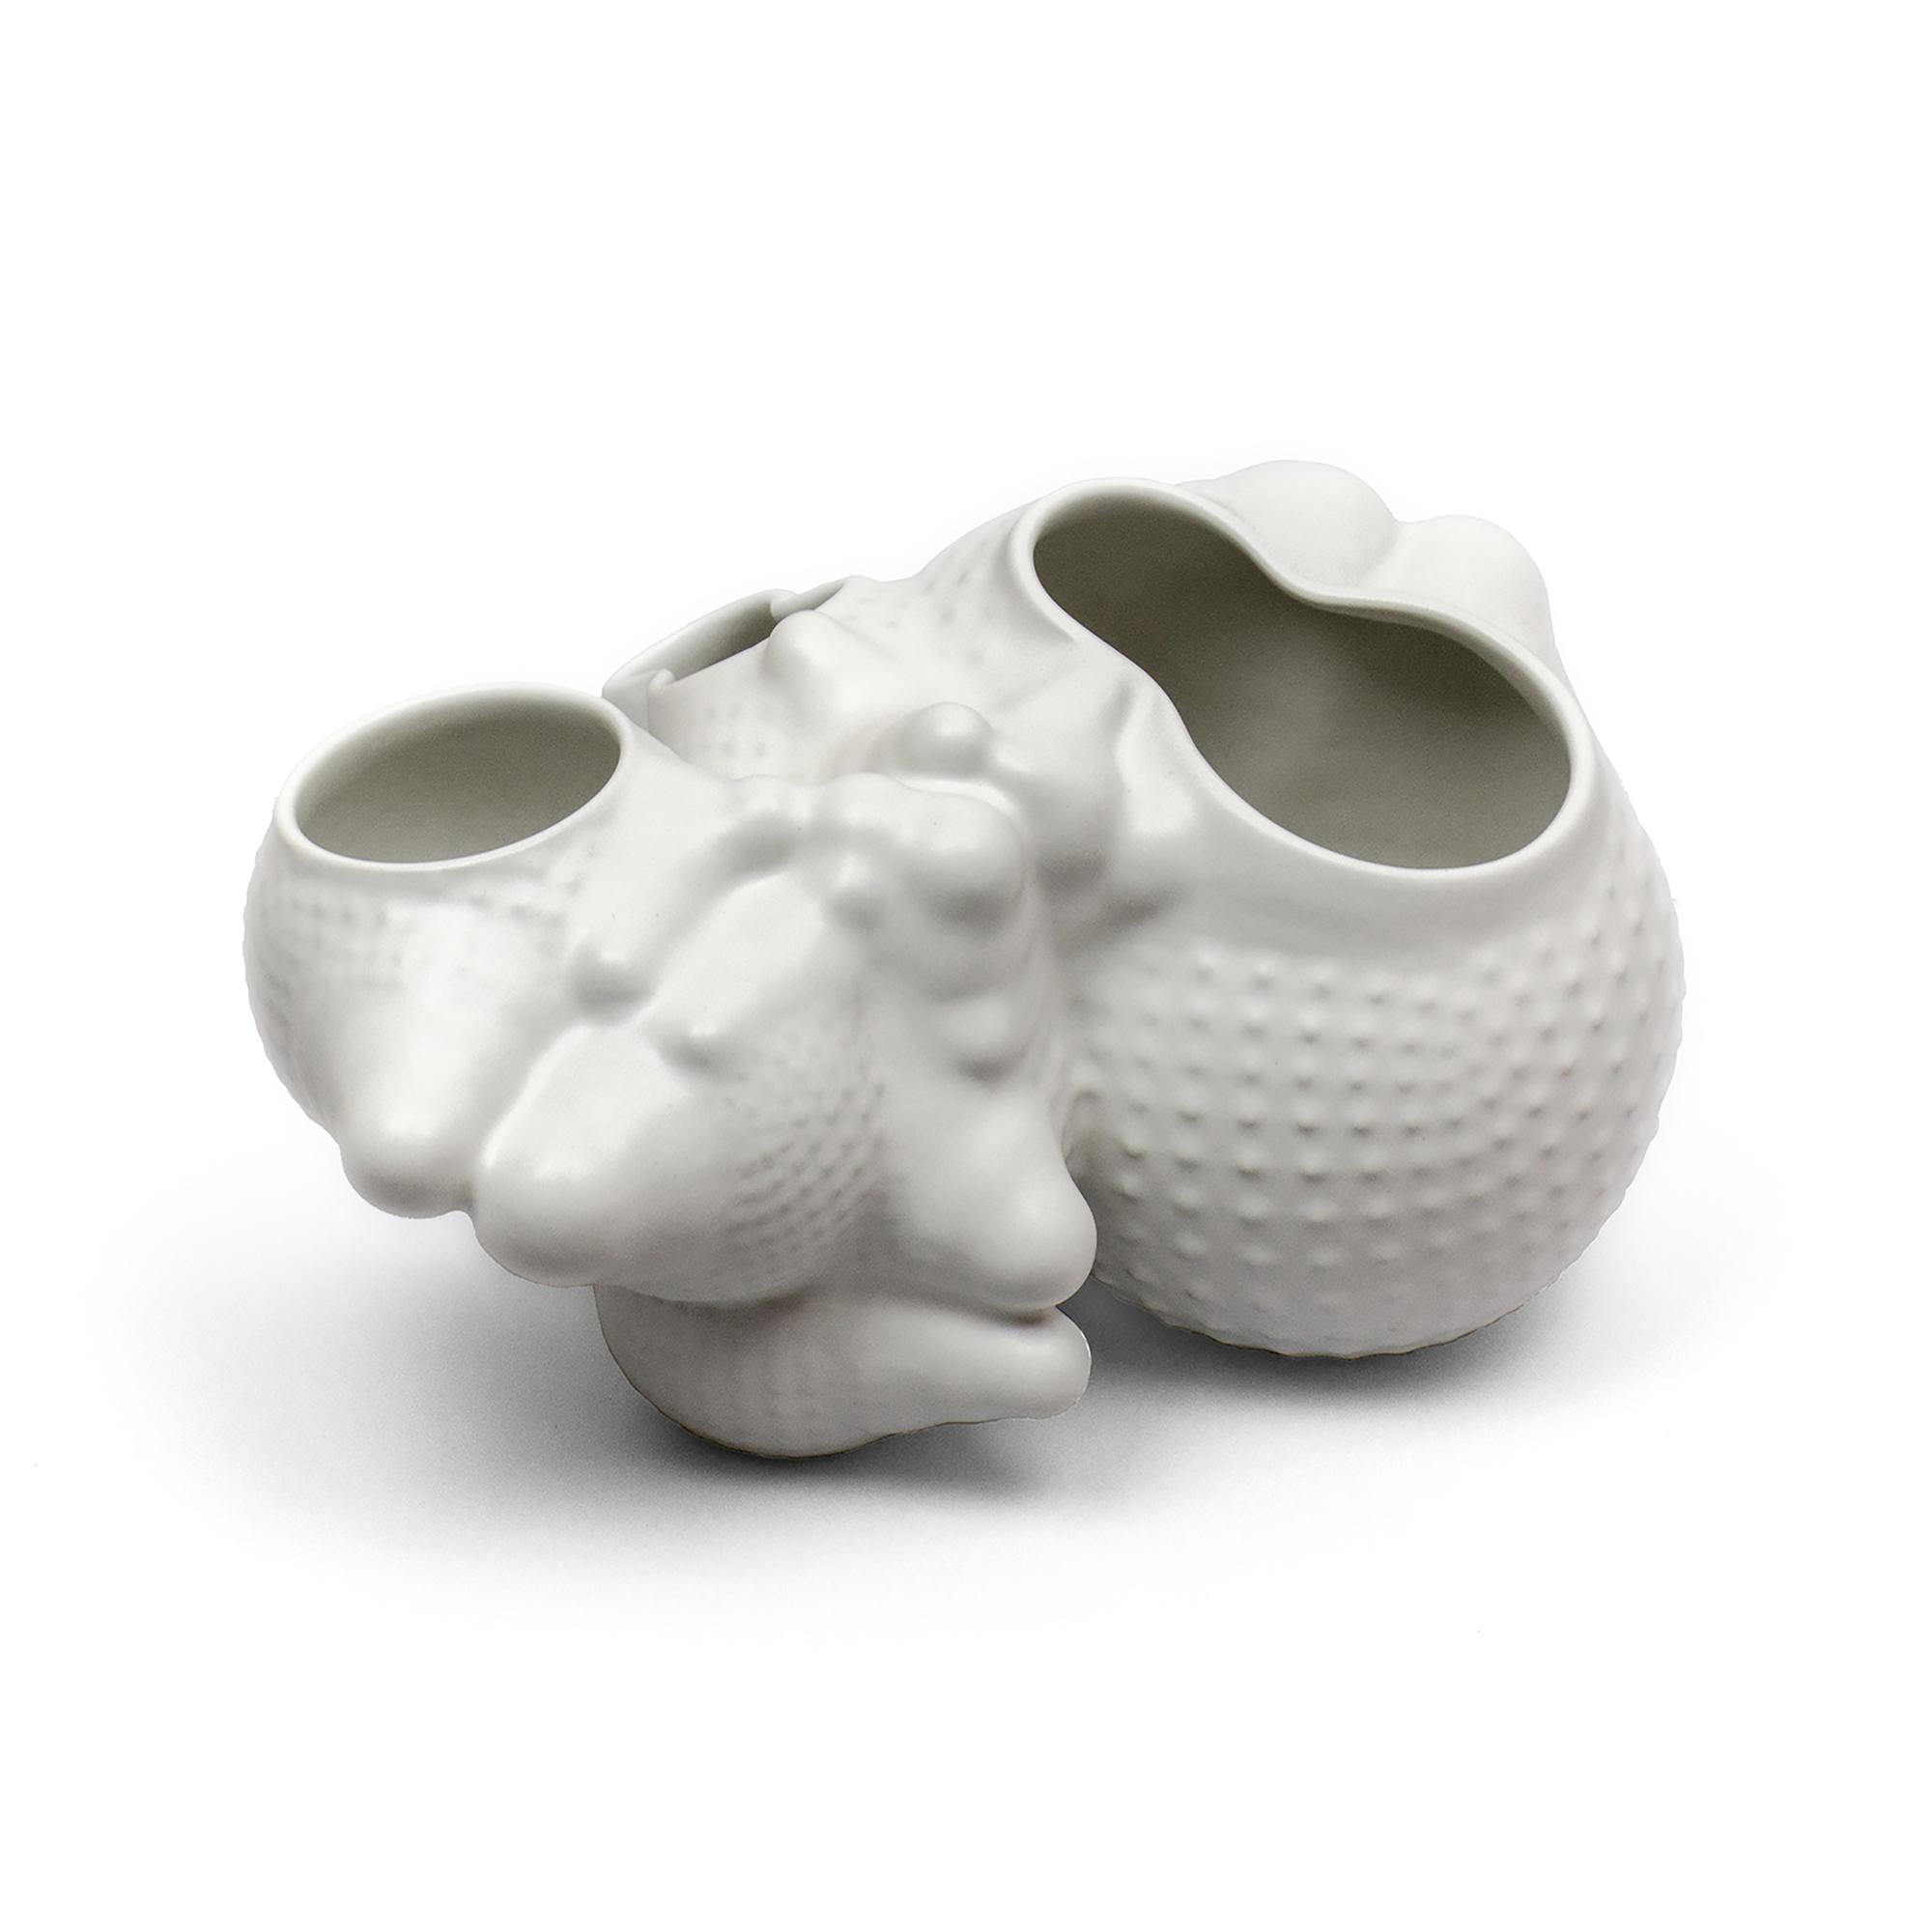 Organic Modern Ceramic Botryoidal Bubbly Planter in White by Forma Rosa Studio For Sale 1